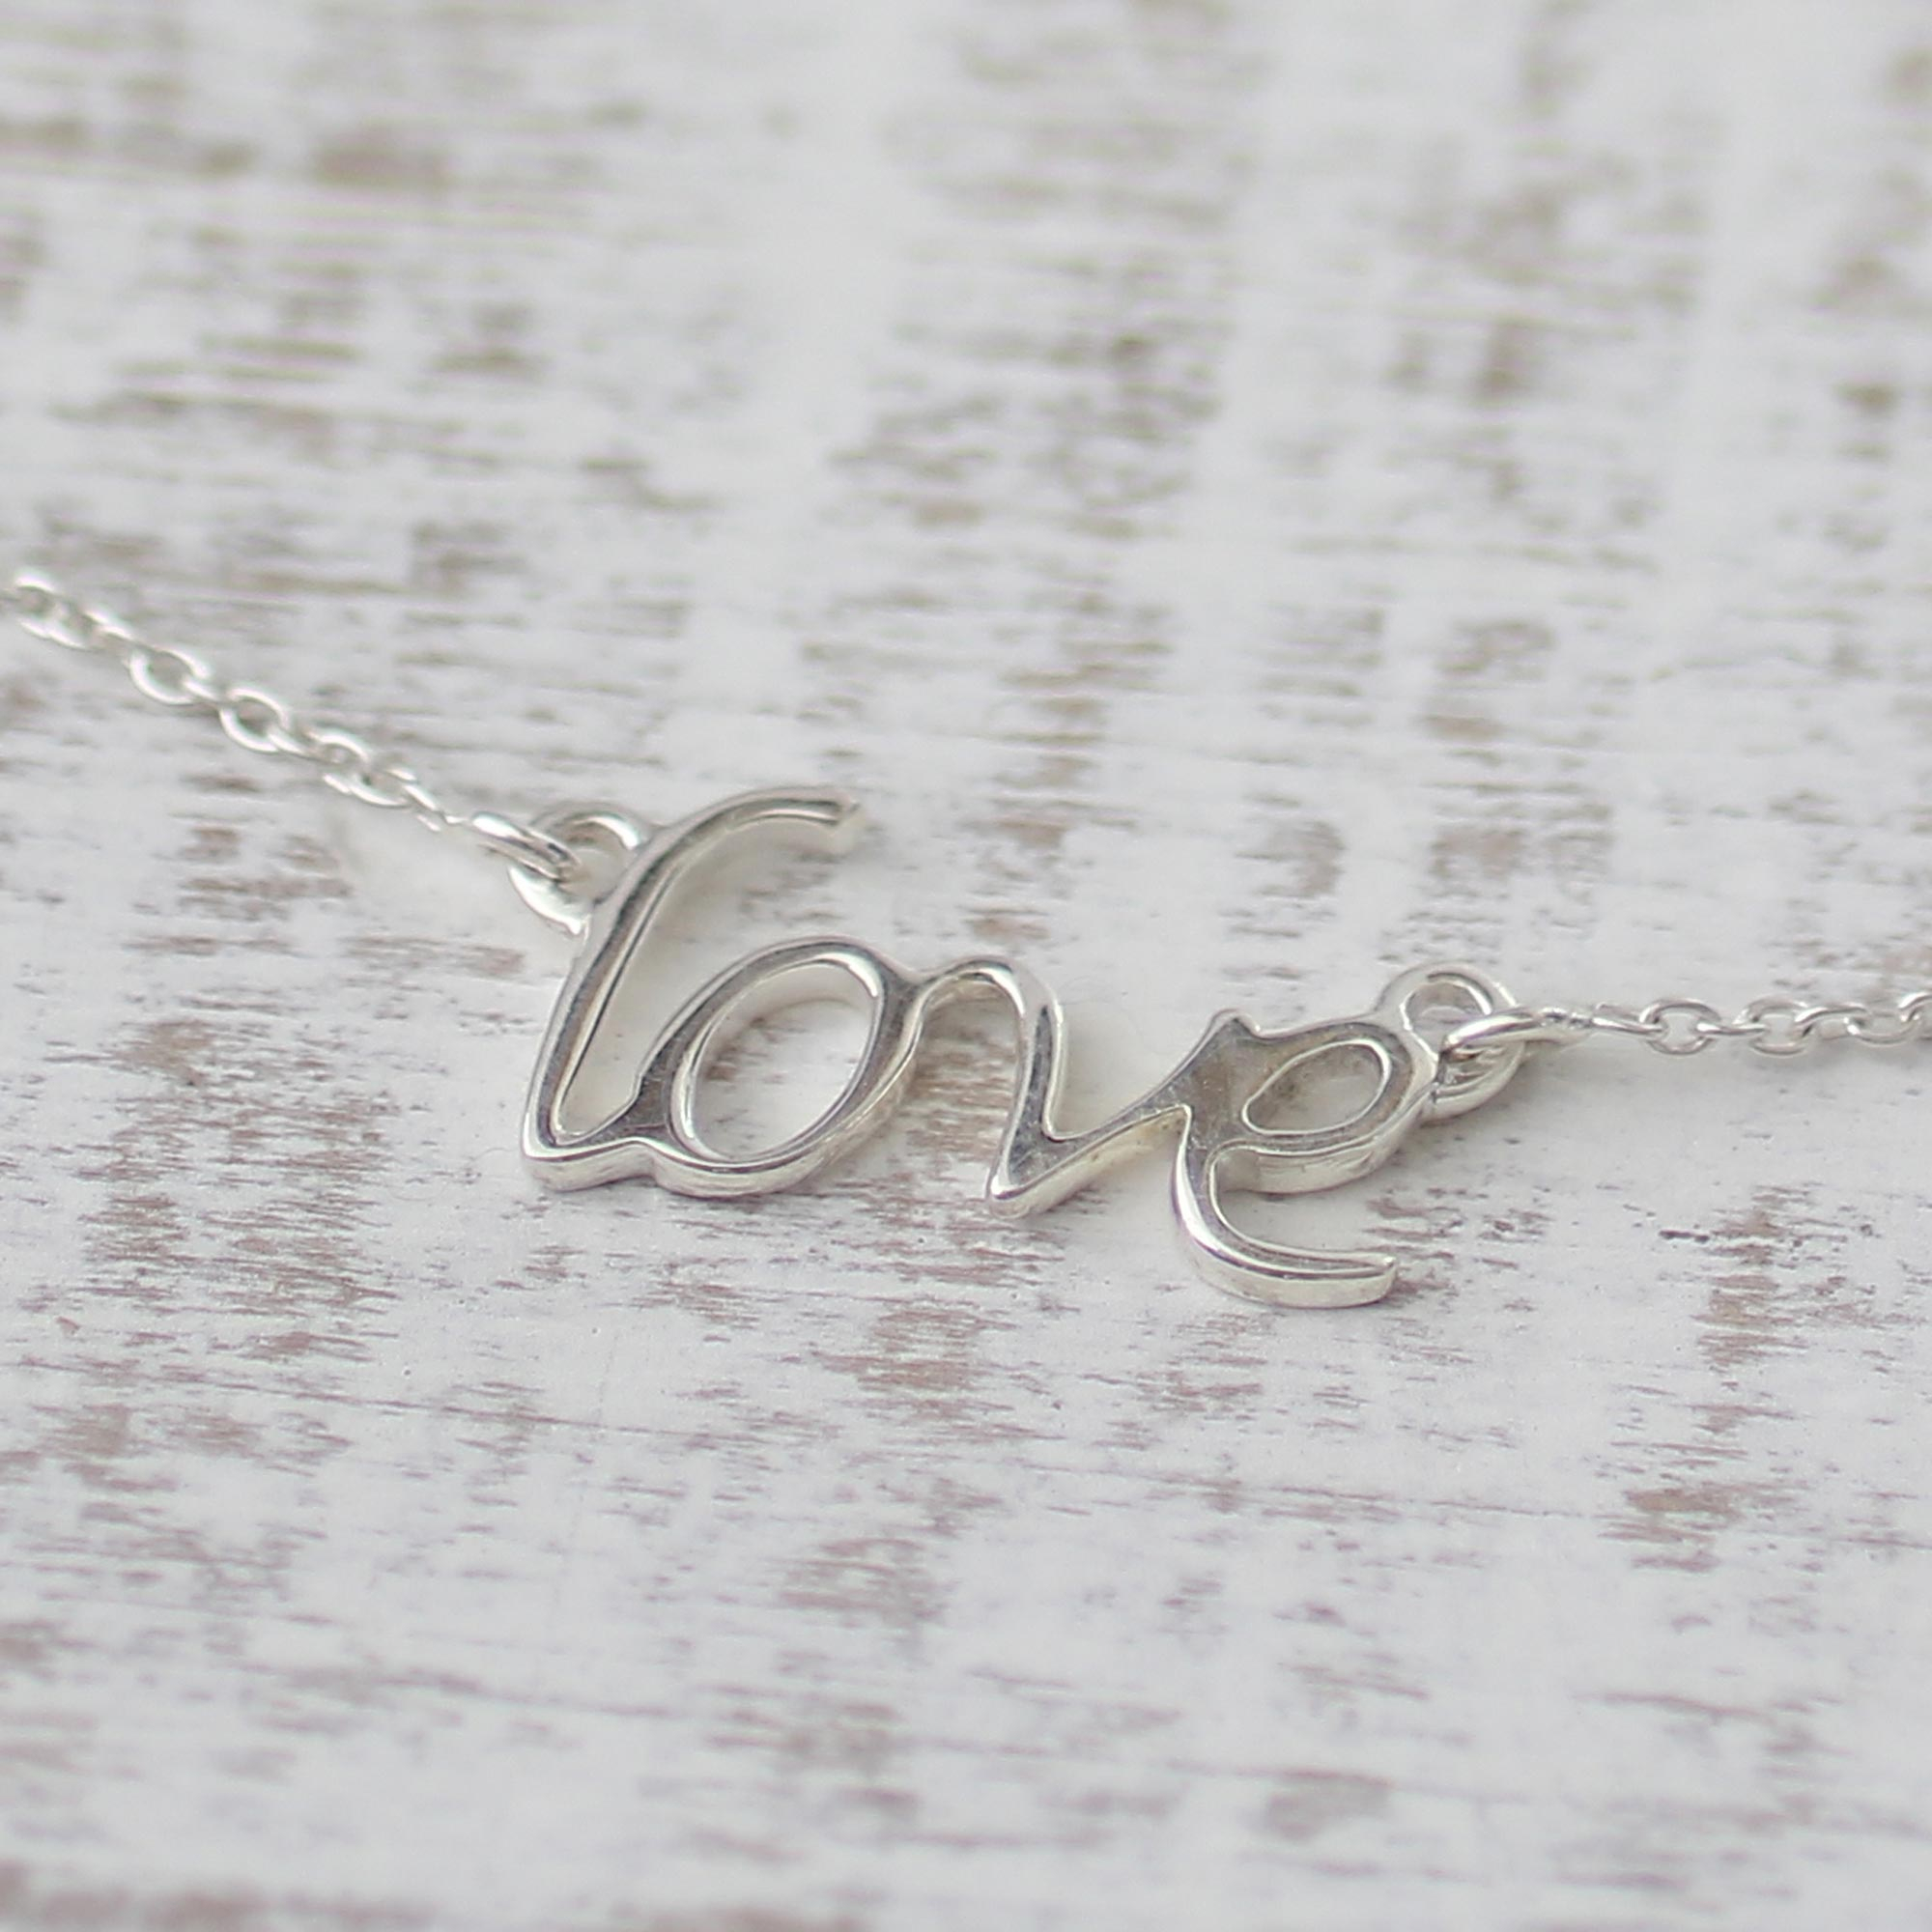 Handcrafted Sterling Silver Love Theme Pendant Necklace - Love Note ...